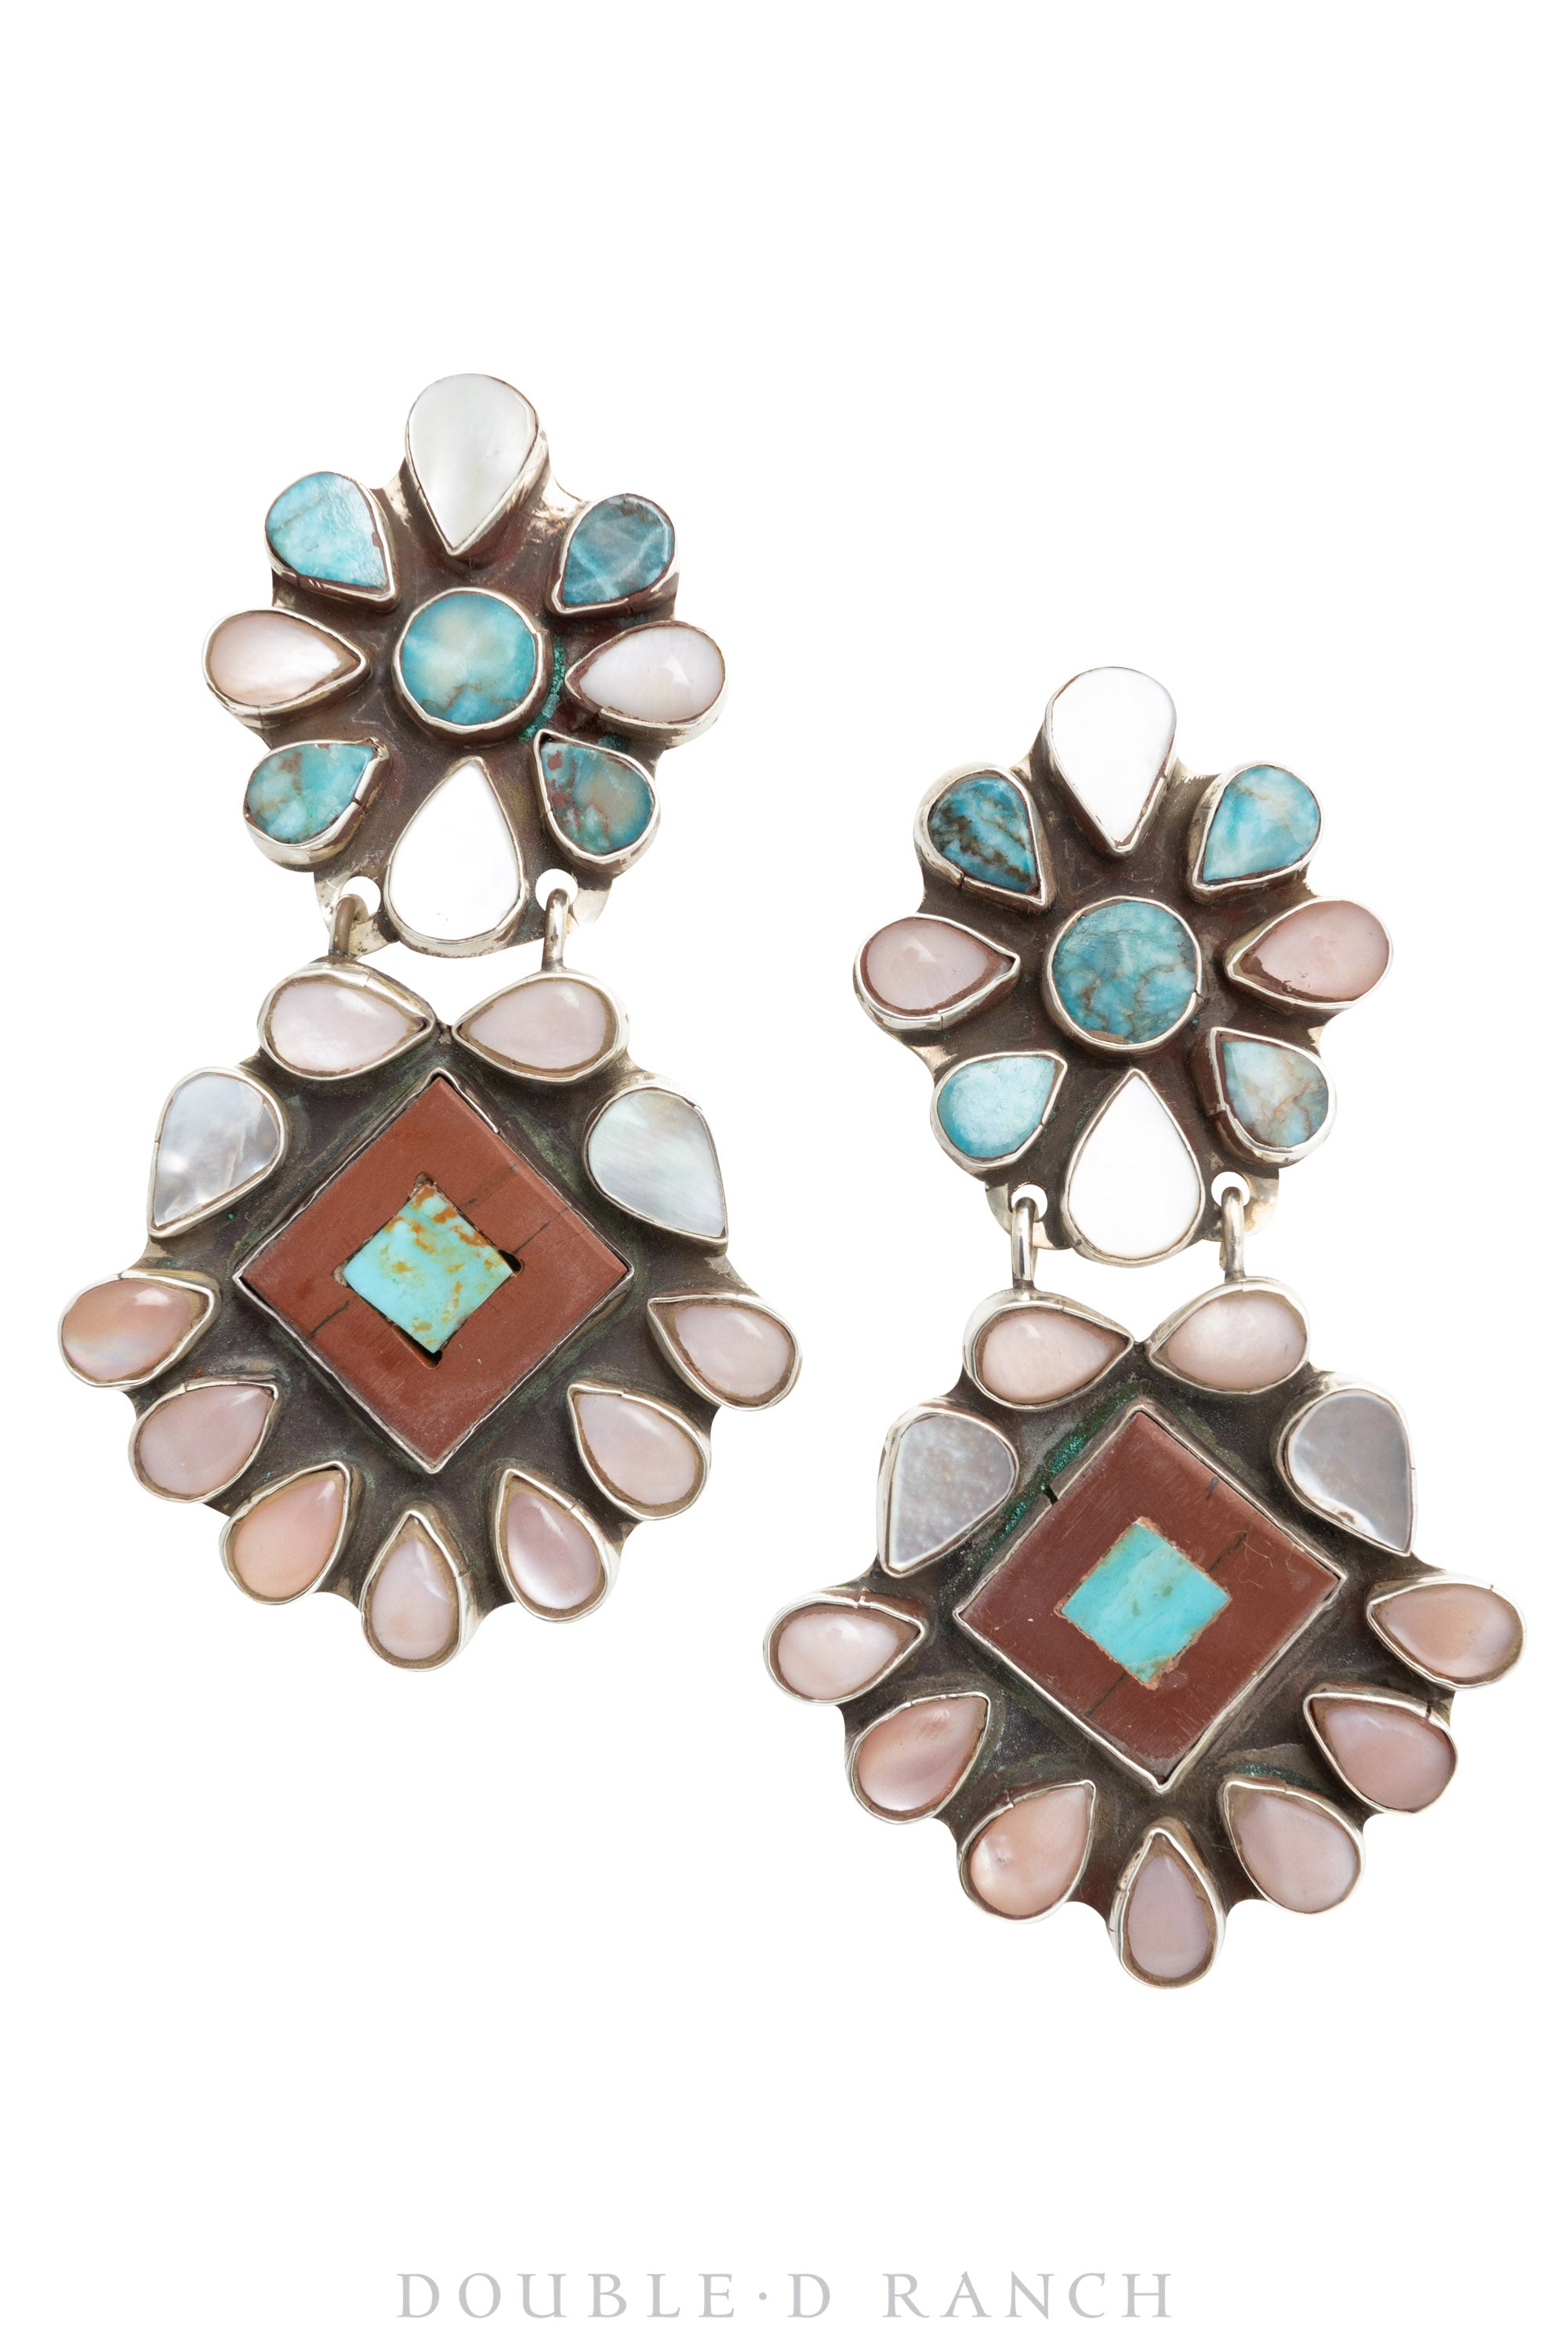 Earrings, Oscar Betz, Fans, Pink Mussel Shell, Turquoise, & Pipestone, Hallmark, Contemporary, 1307